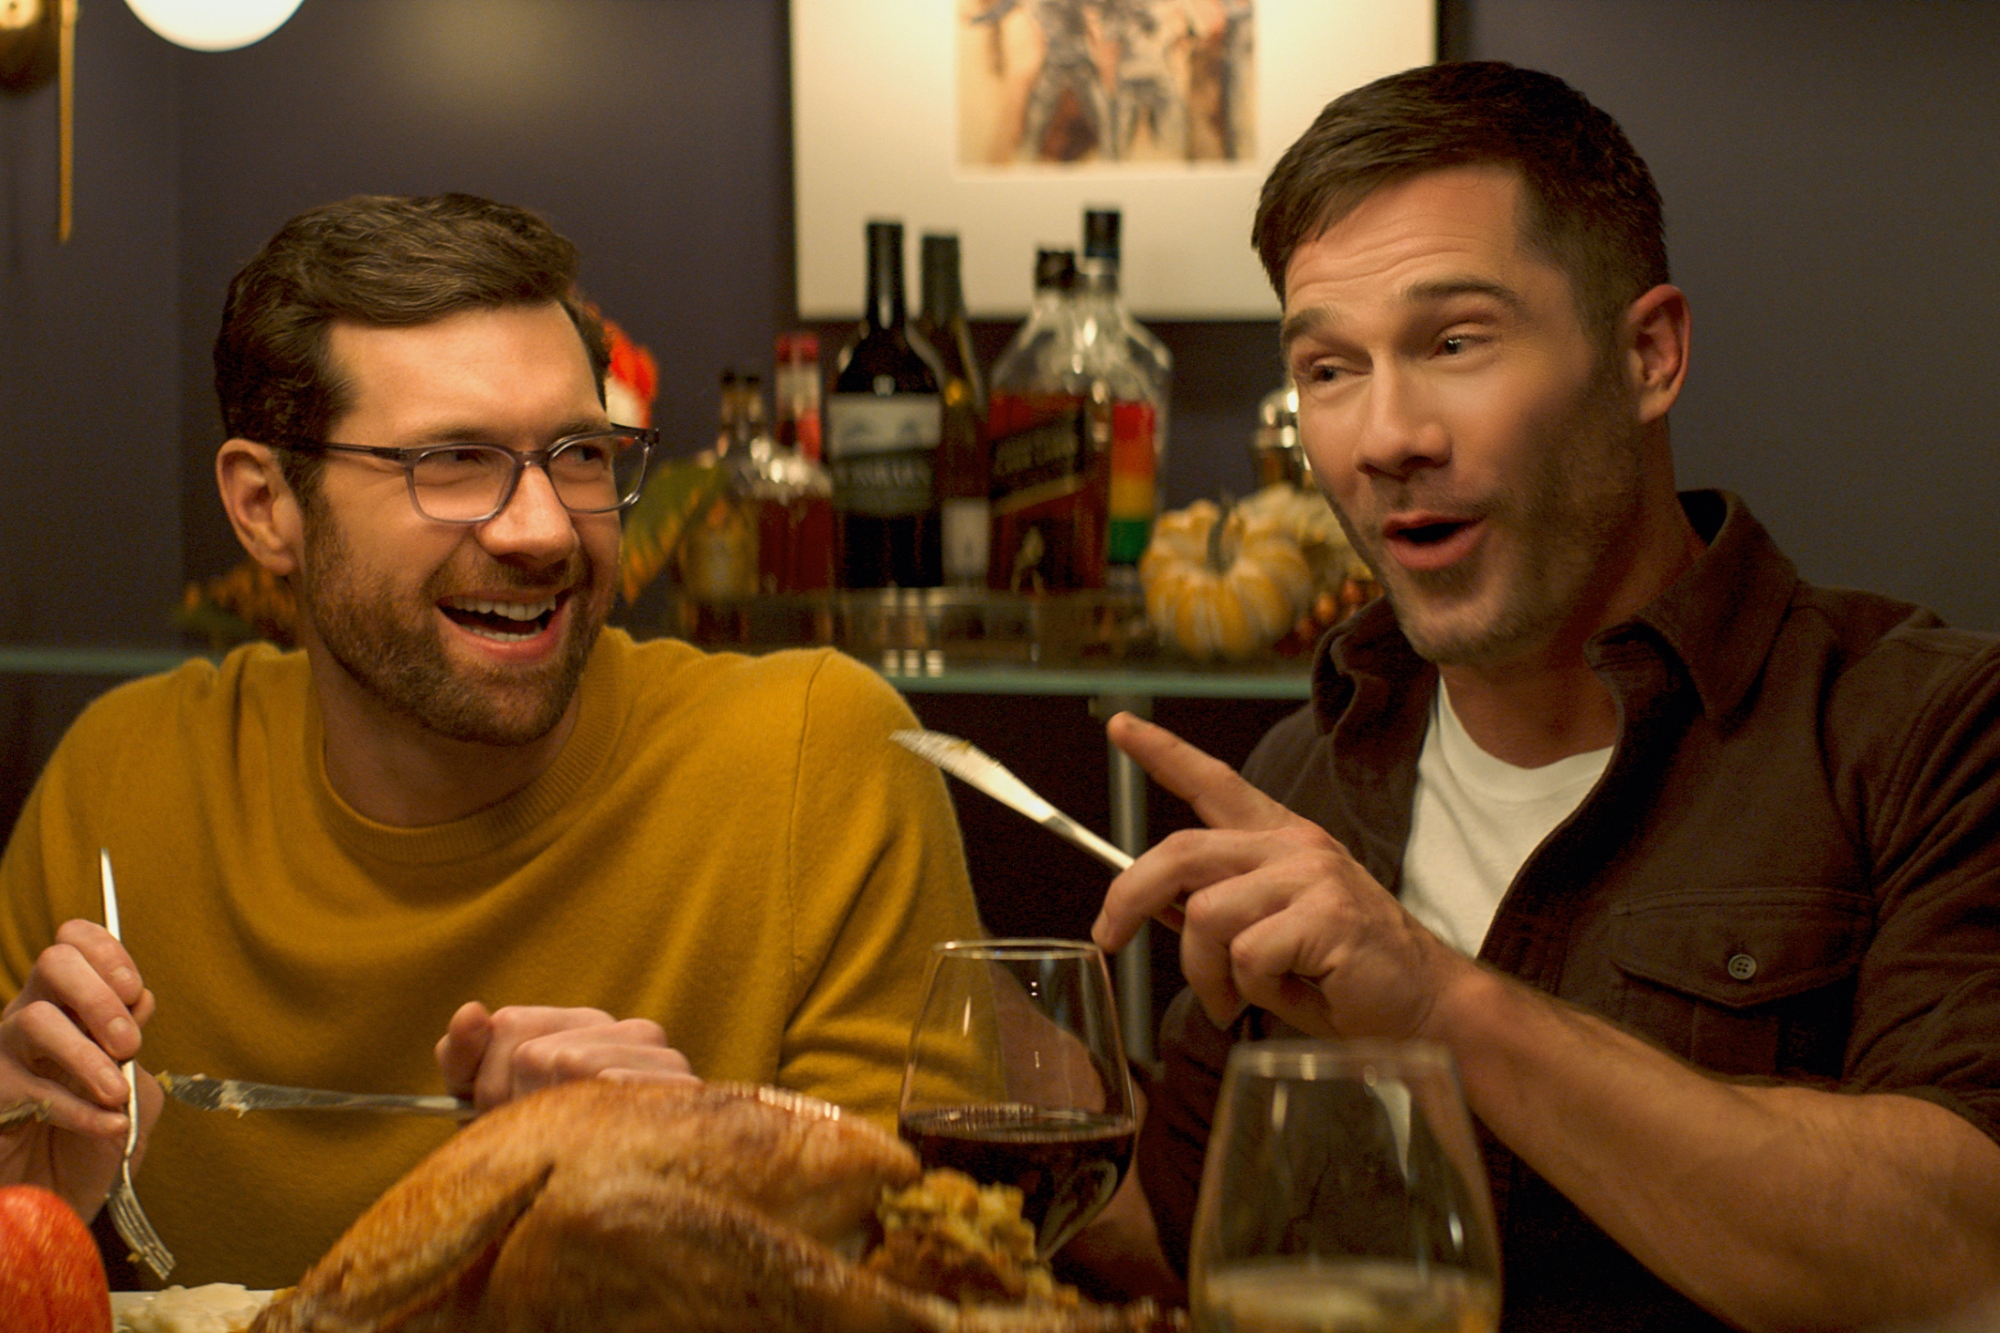 'Bros' Billy Eichner as Bobby Leiber and Luke Macfarlane as Aaron Shepard. Eichner is laughing wearing a yellow shirt holding a fork. Macfarlane is wearing a white shirt under an overshirt holding a butterknife and pointing across the table.